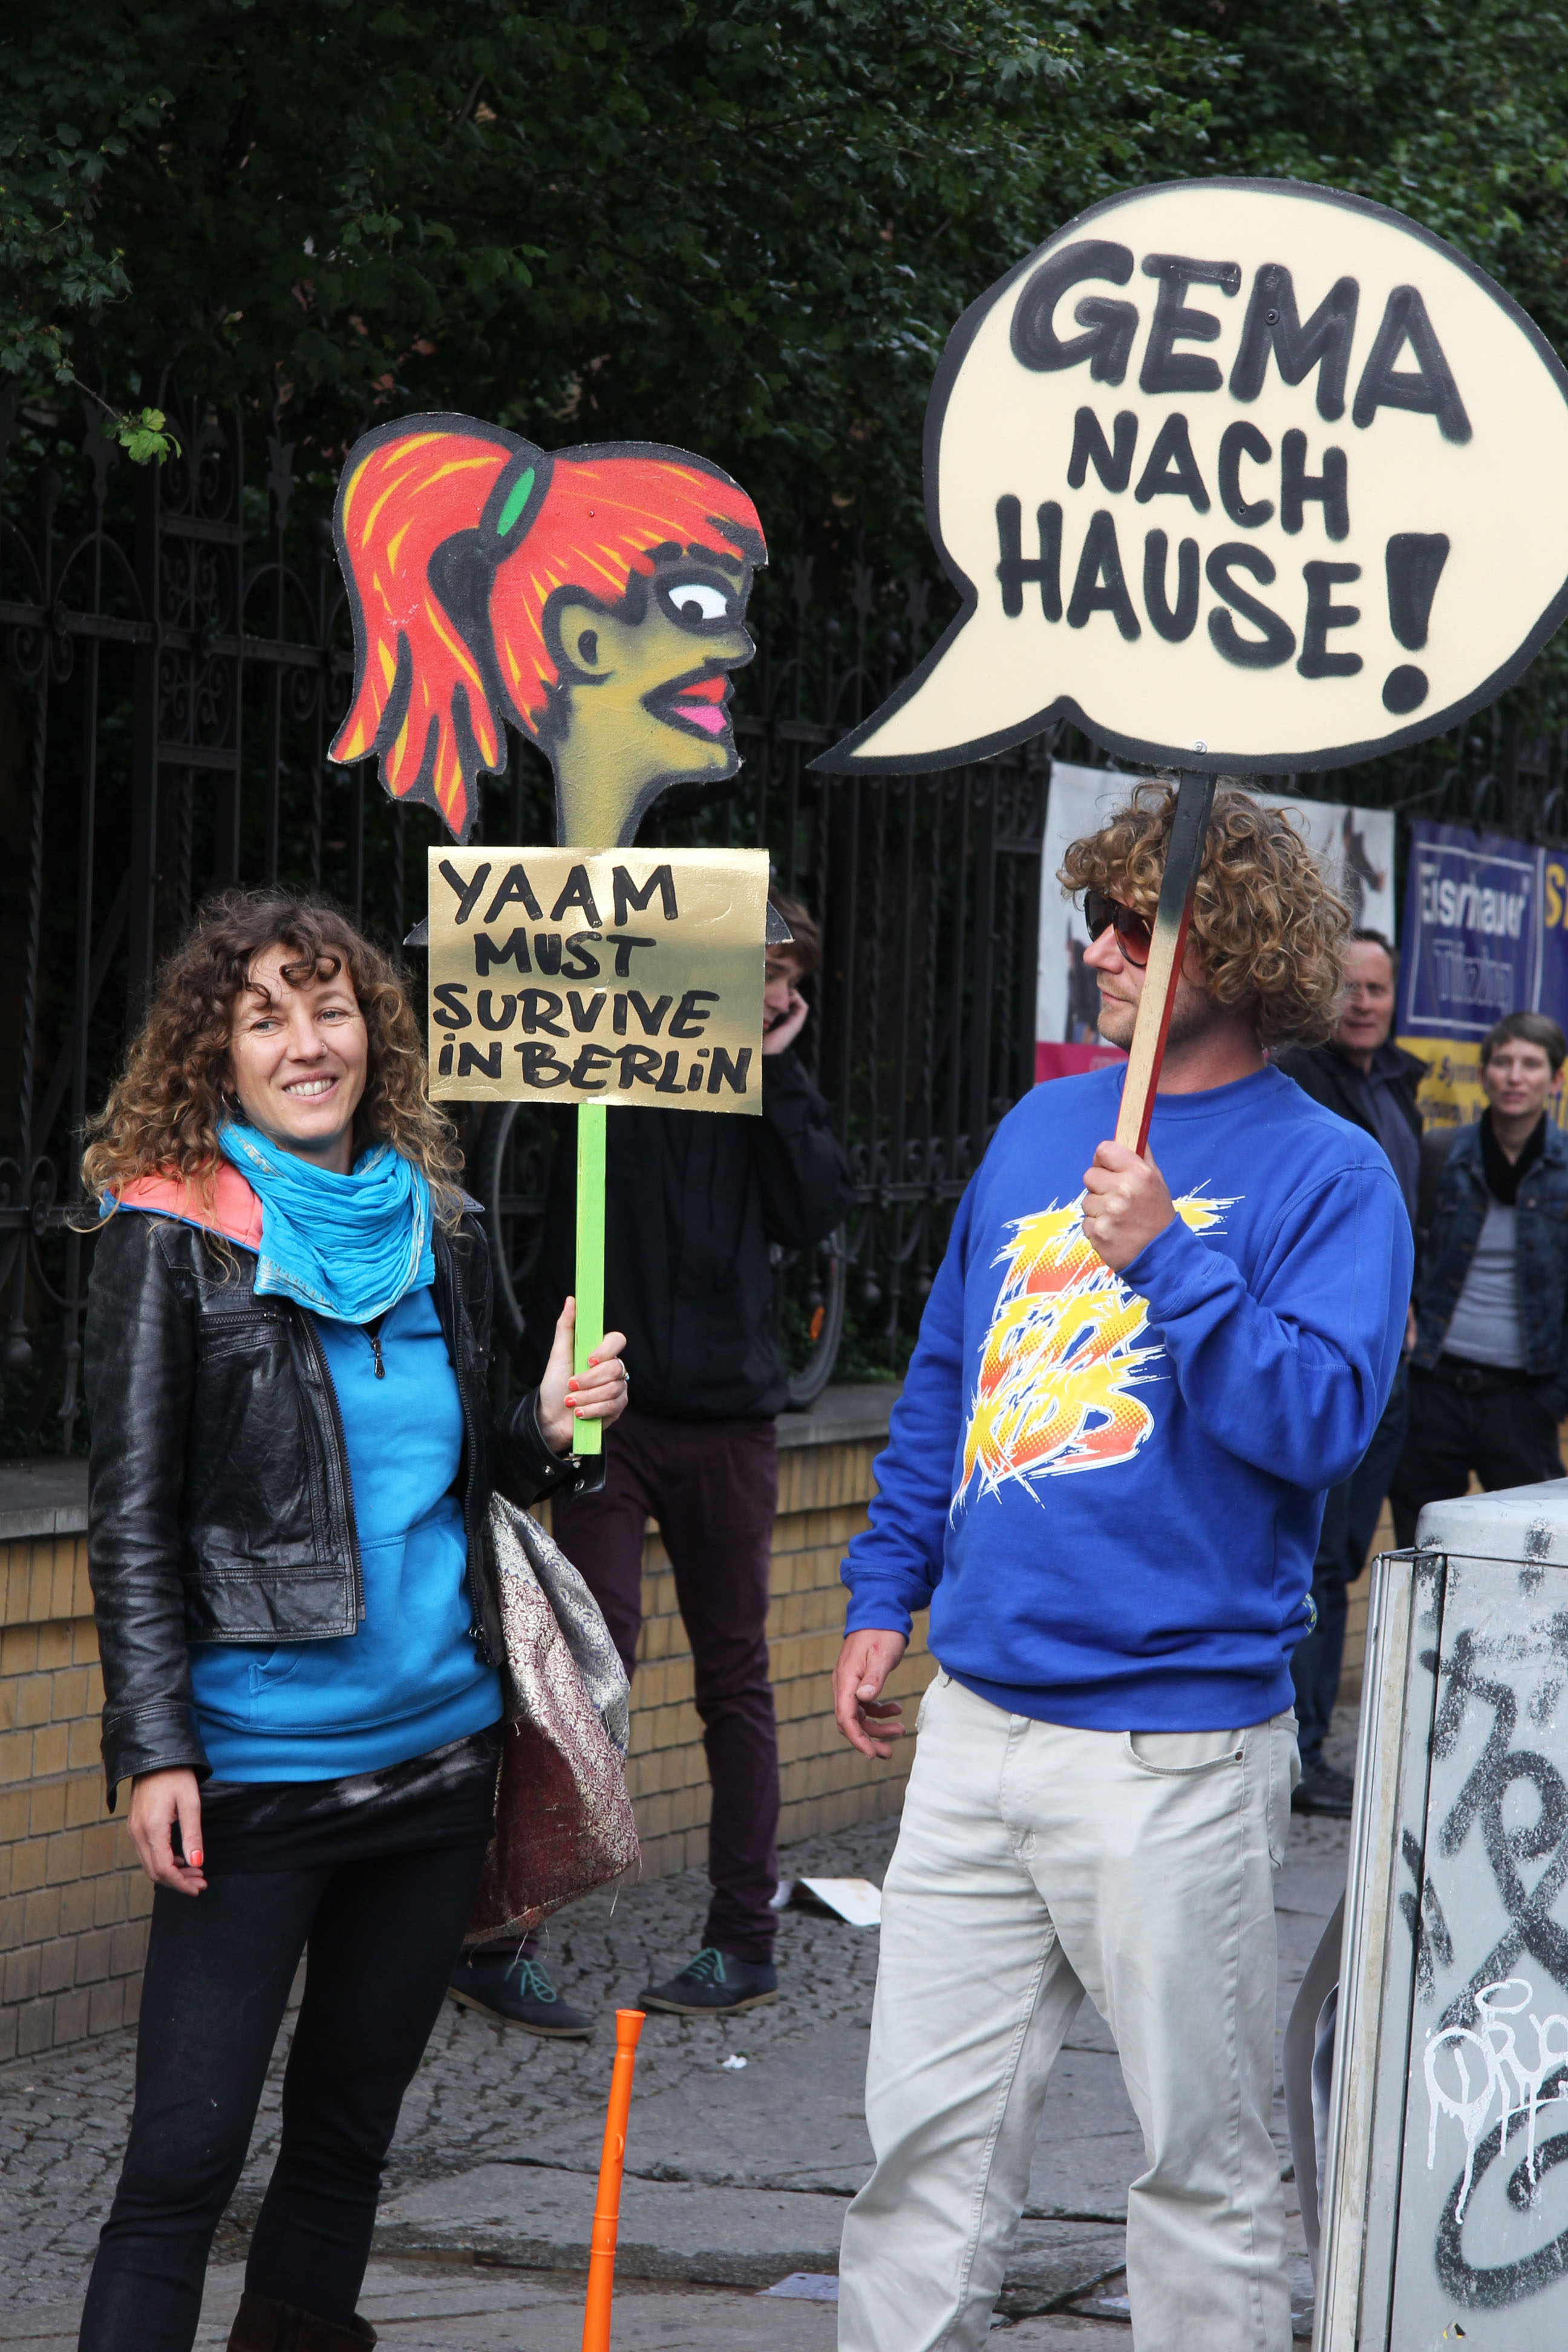 Protesters hold placards at the GEMA protest at the Kulturbrauerei in Berlin